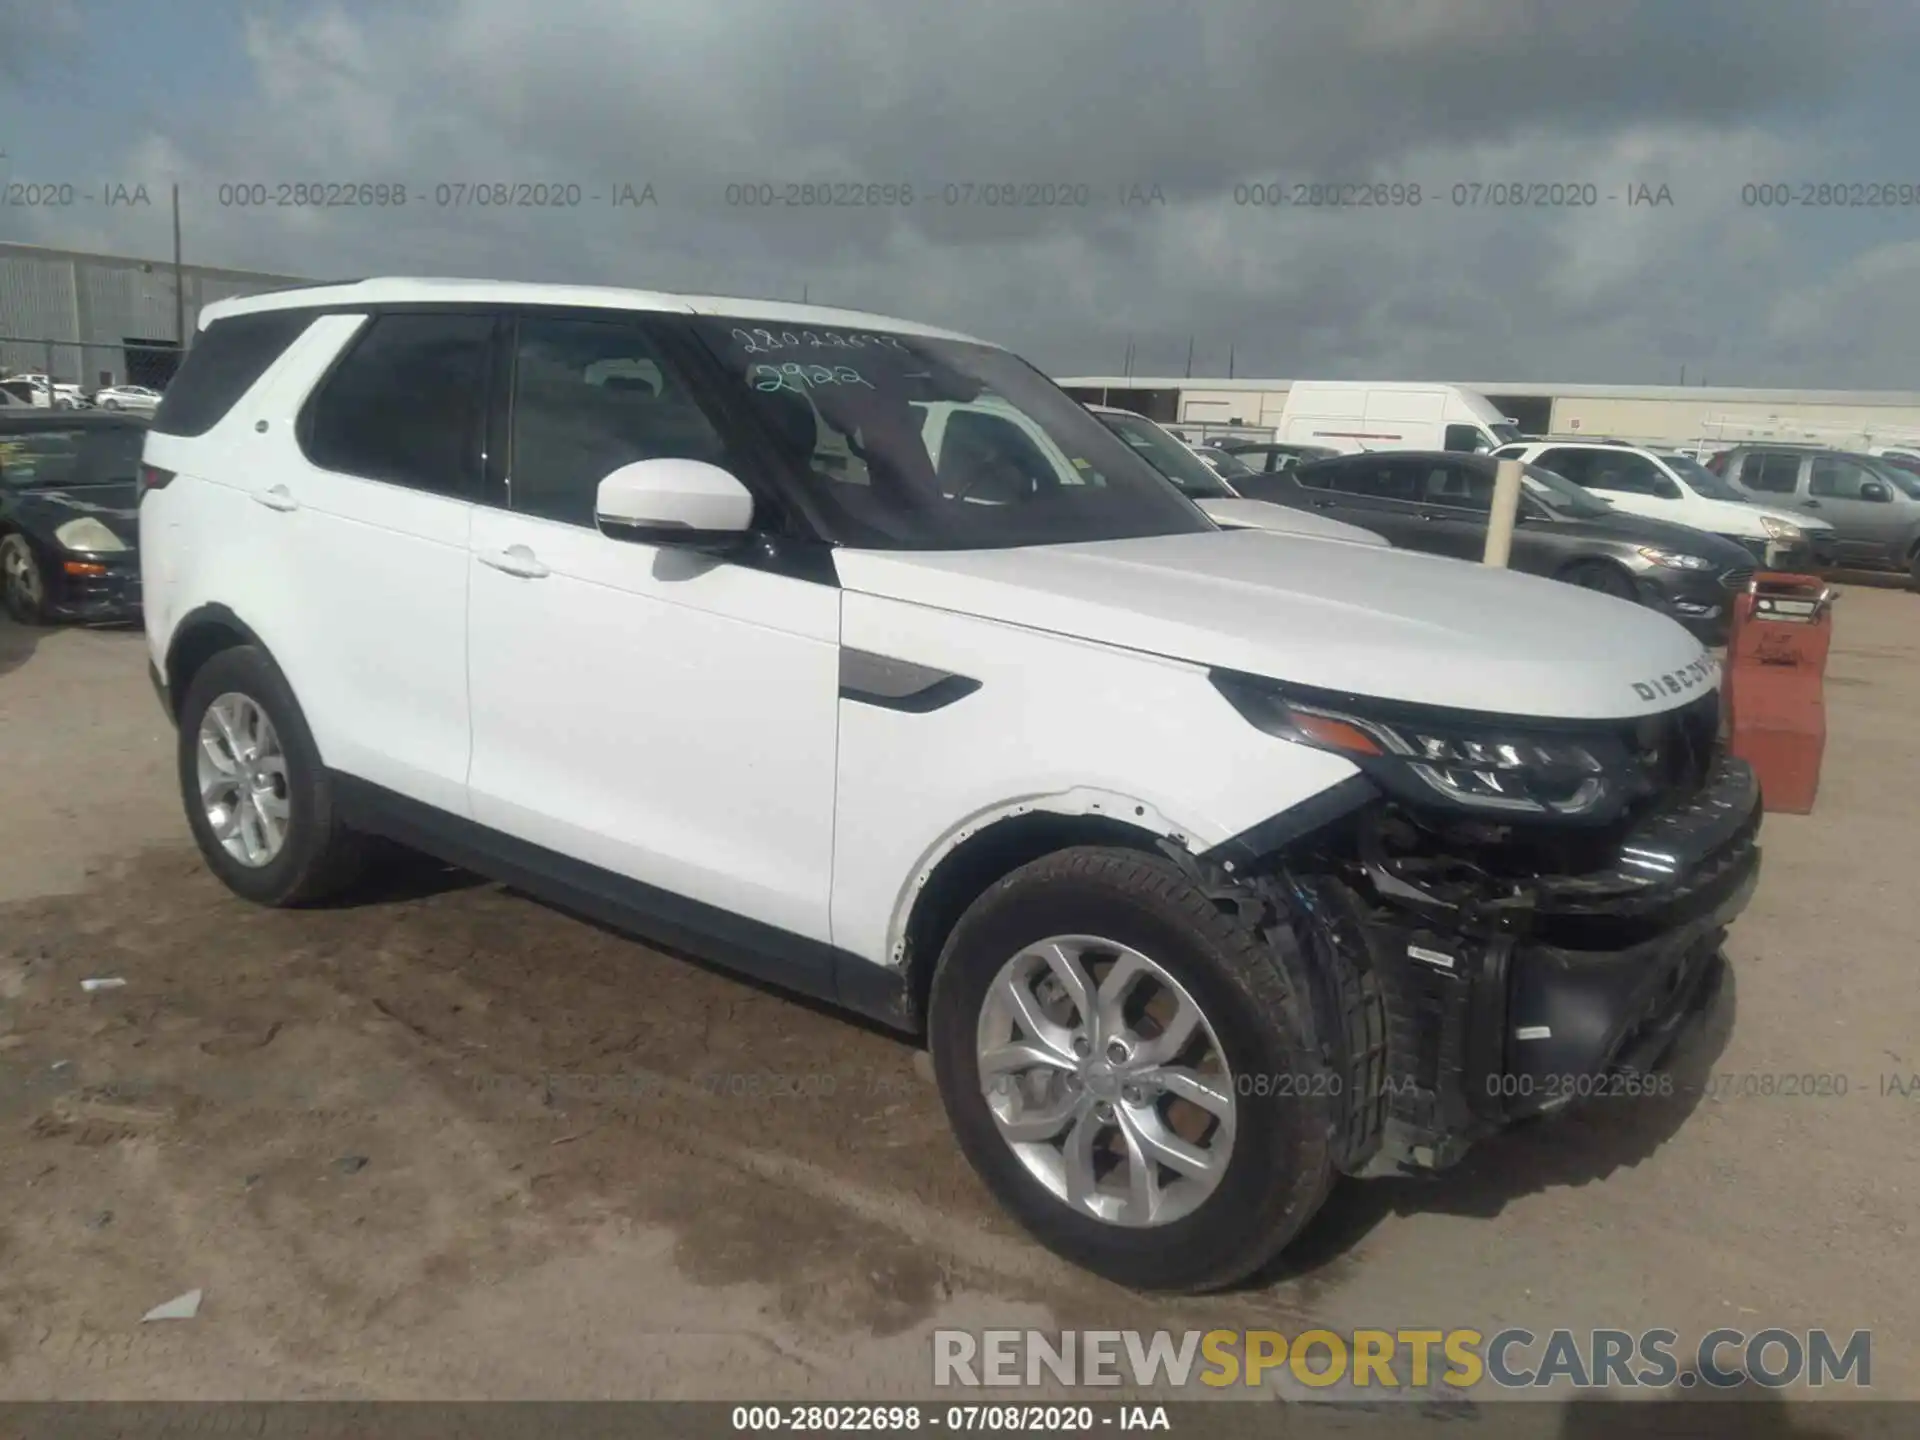 1 Photograph of a damaged car SALRG2RV3L2426232 LAND ROVER DISCOVERY 2020